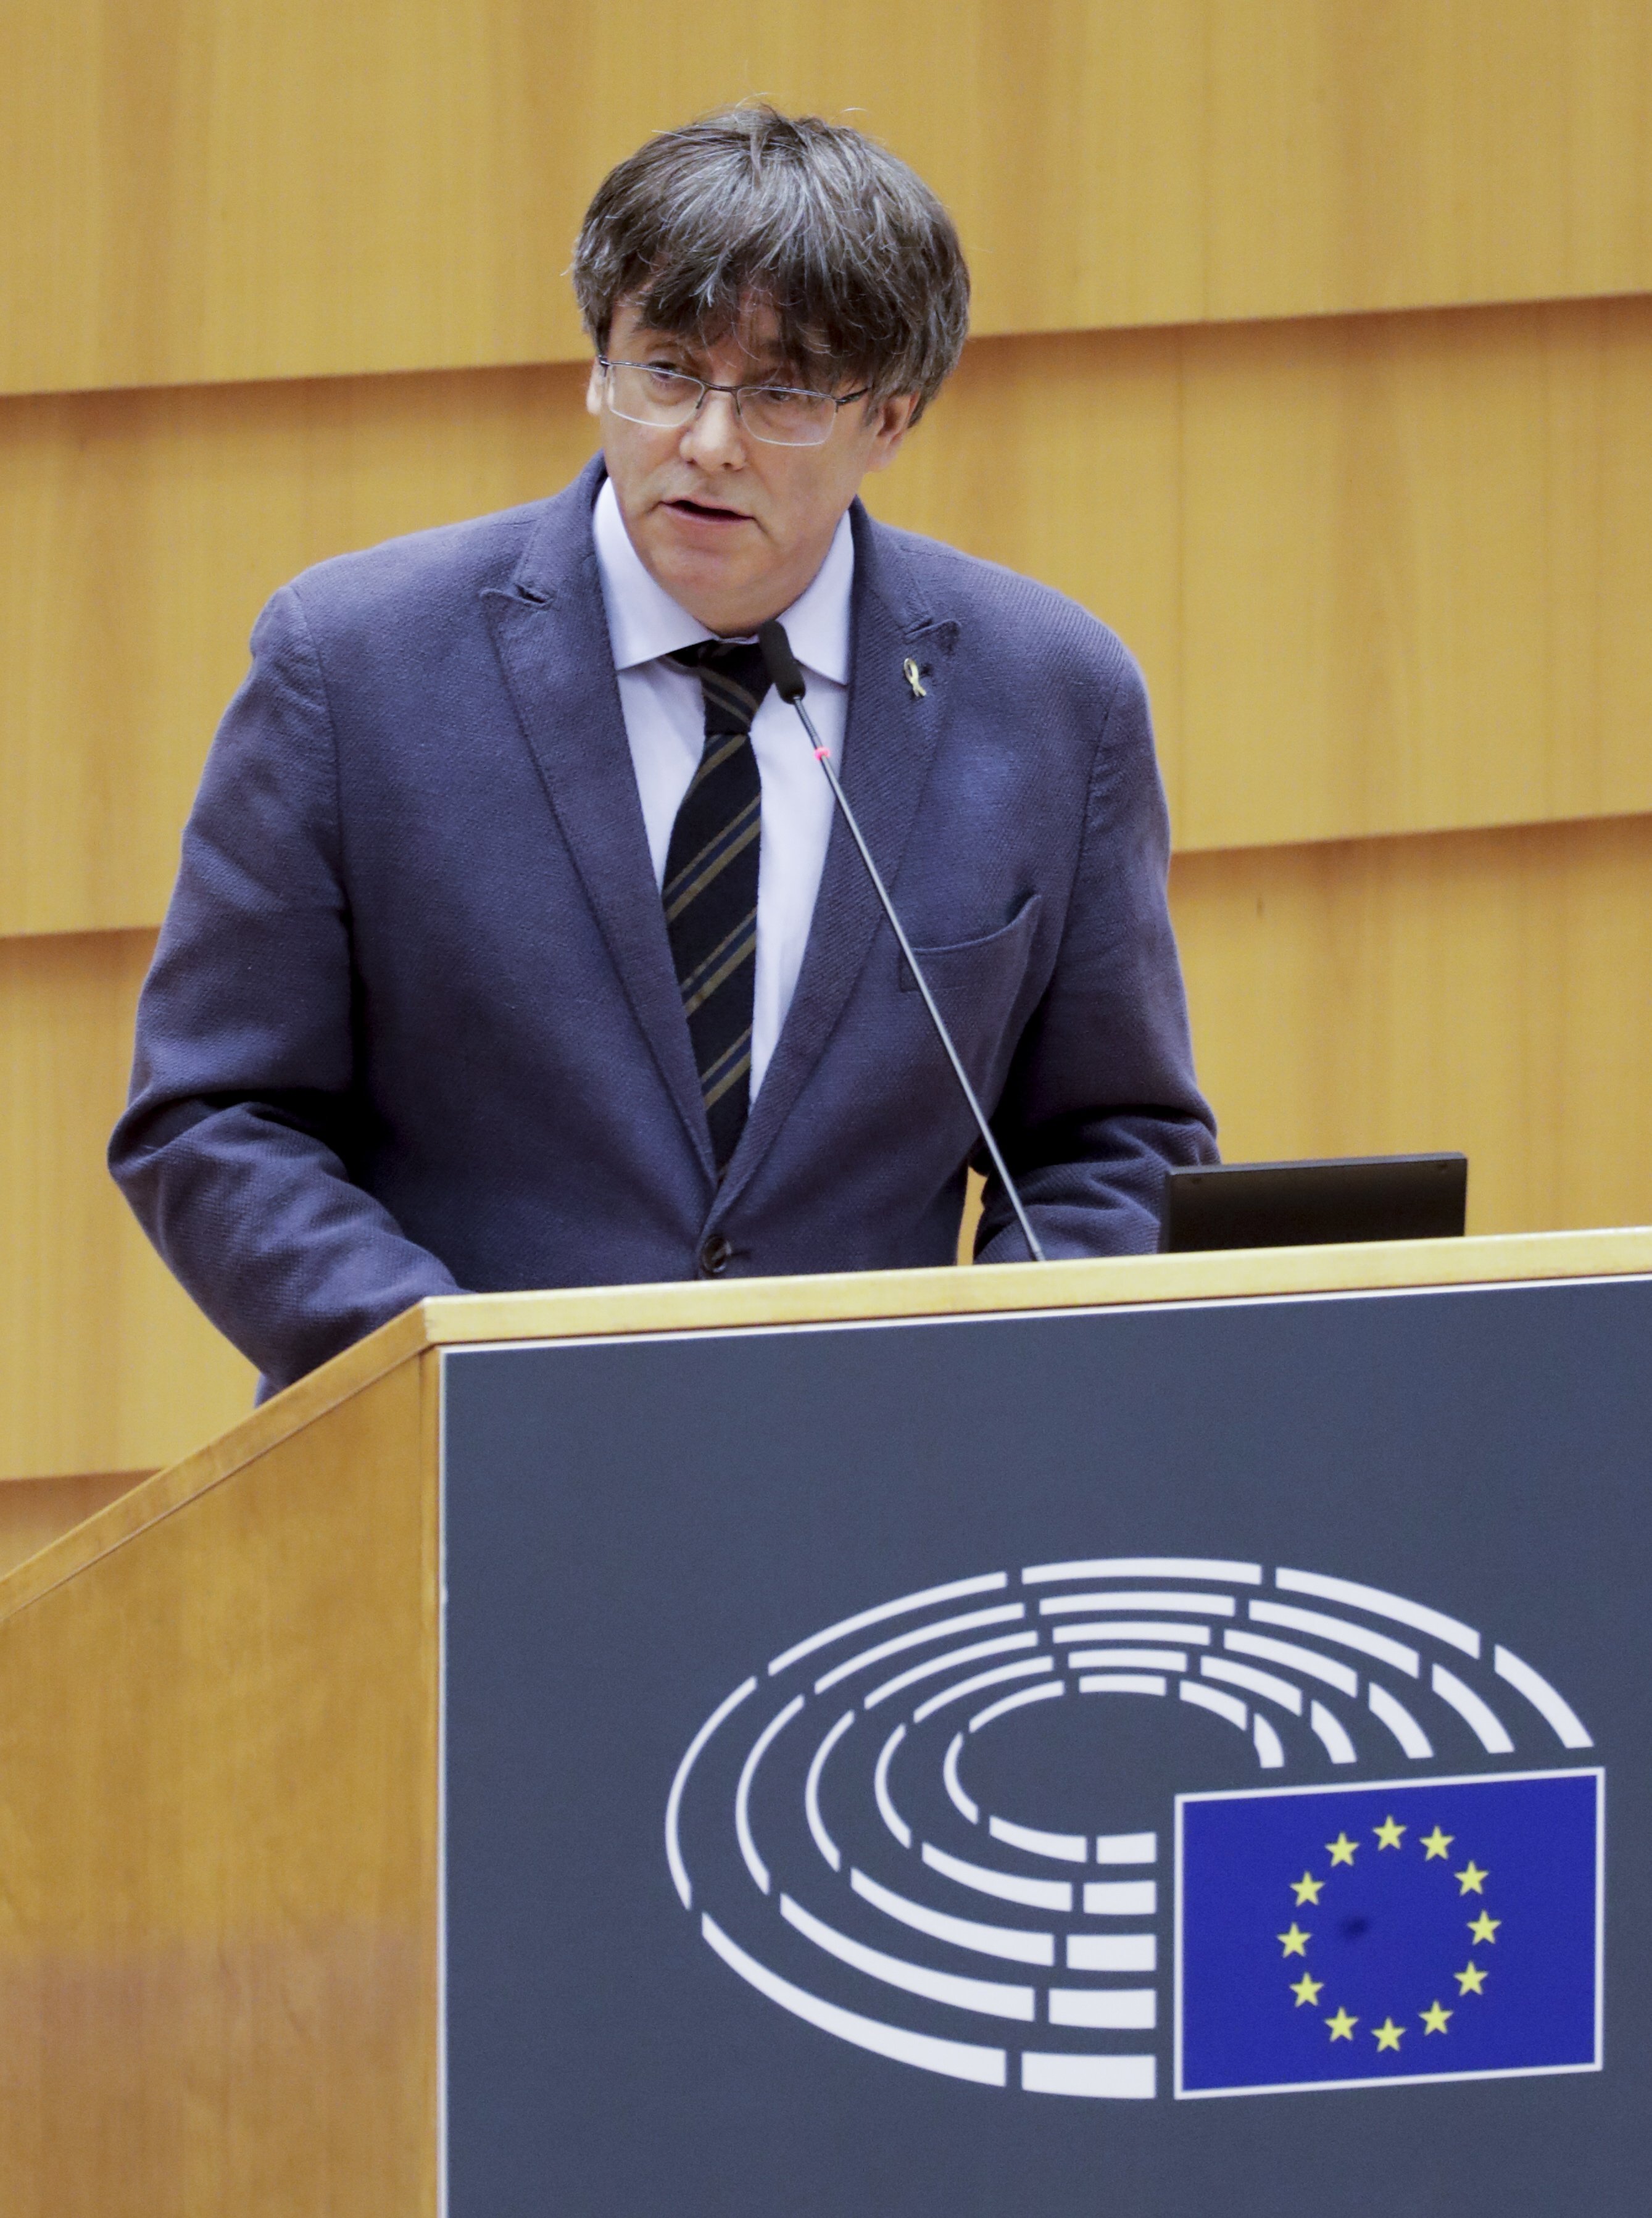 Puigdemont to European Parliament: "Fascism is not an opinion, it's a crime"